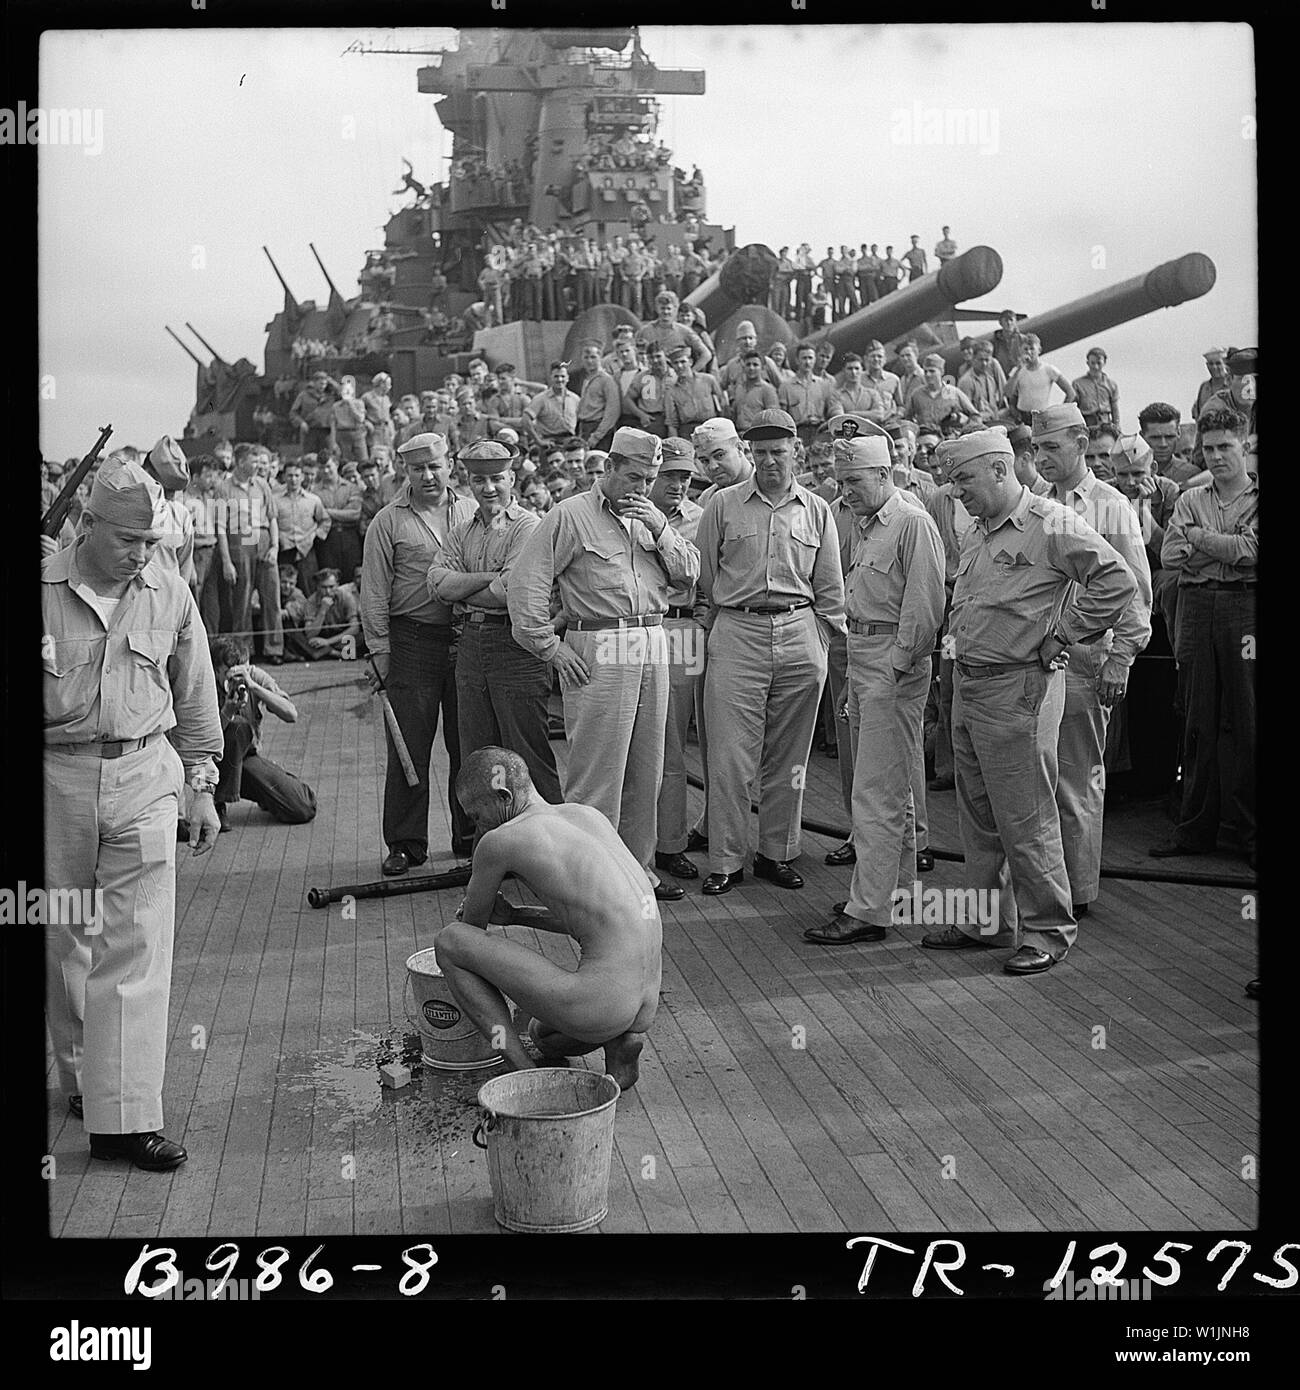 The crewmen of the battleship USS New Jersey watch a Japanese prisoner of war bathe himself before he is issued GI clothing.; General notes:  Use War and Conflict Number 1305 when ordering a reproduction or requesting information about this image. Stock Photo